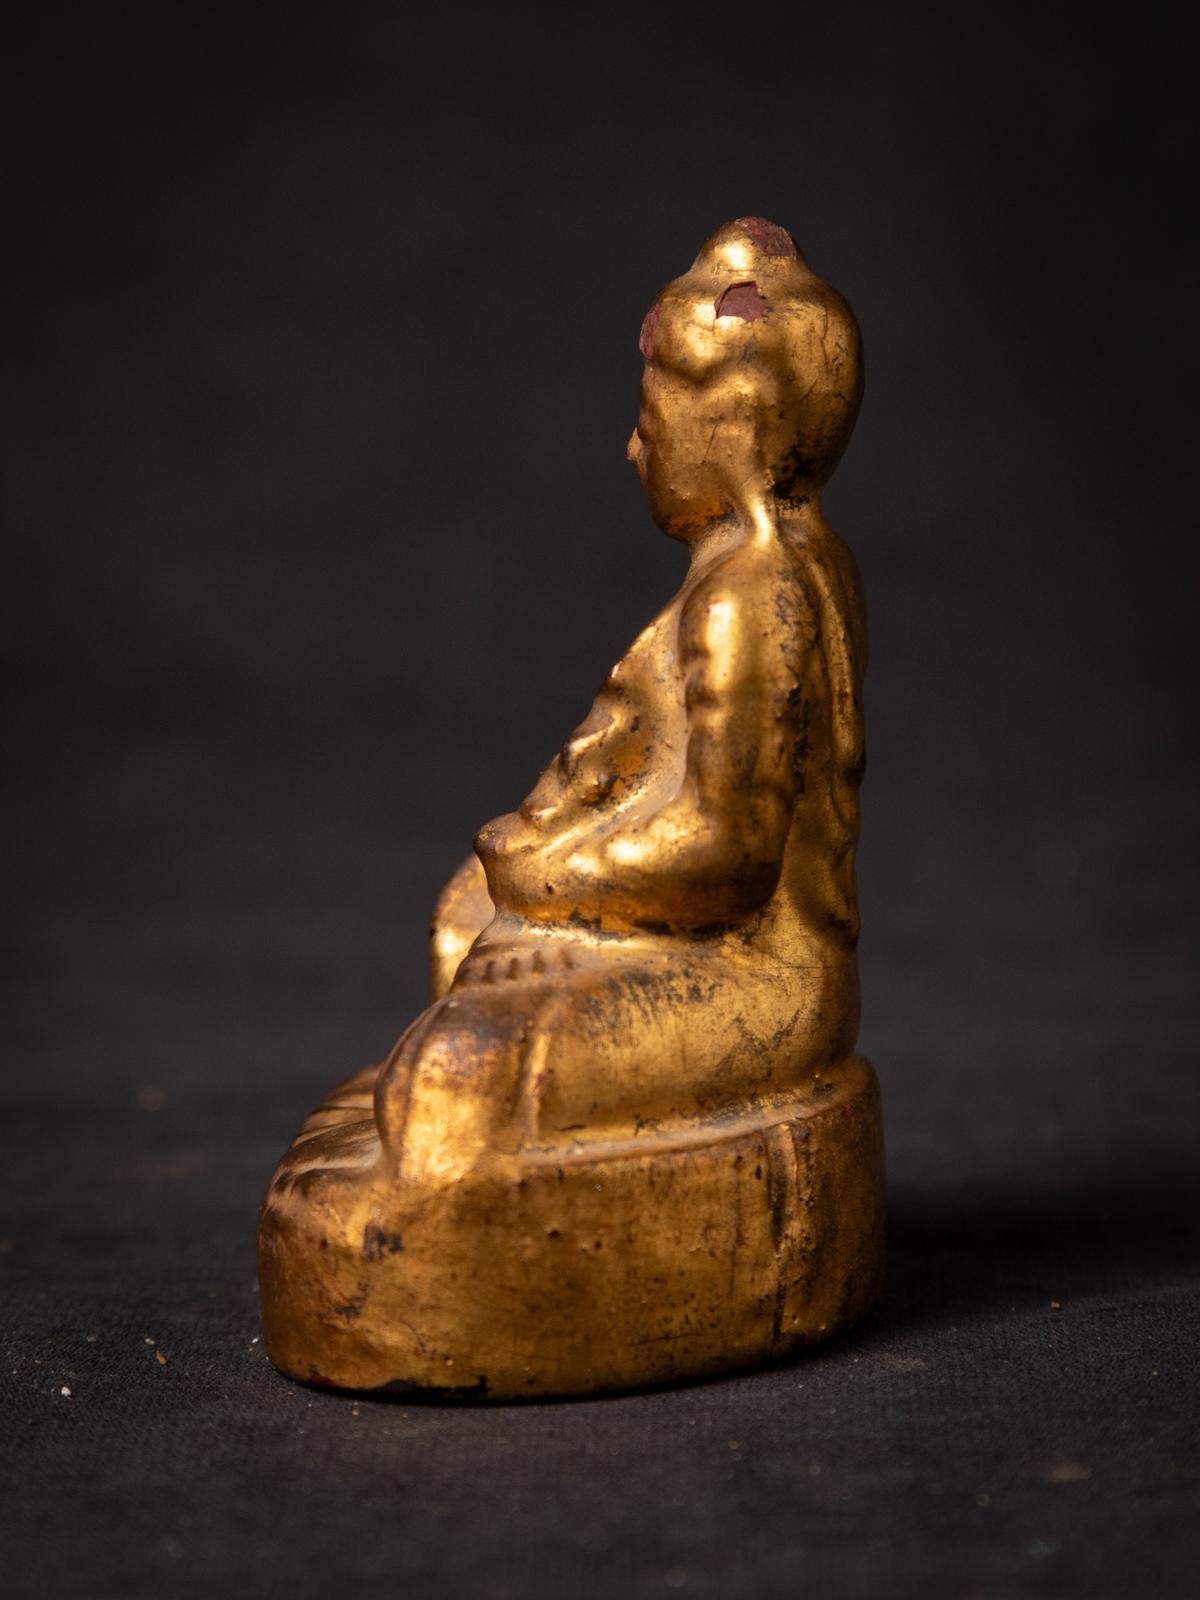 Antique wooden Burmese Buddha
Material : wood
8,6 cm high
6,5 cm wide and 4,9 cm deep
Gilded with 24 krt. gold
Mandalay style
Bhumisparsha mudra
19th century
Weight: 59 grams
Originating from Burma
Nr: 3827-10